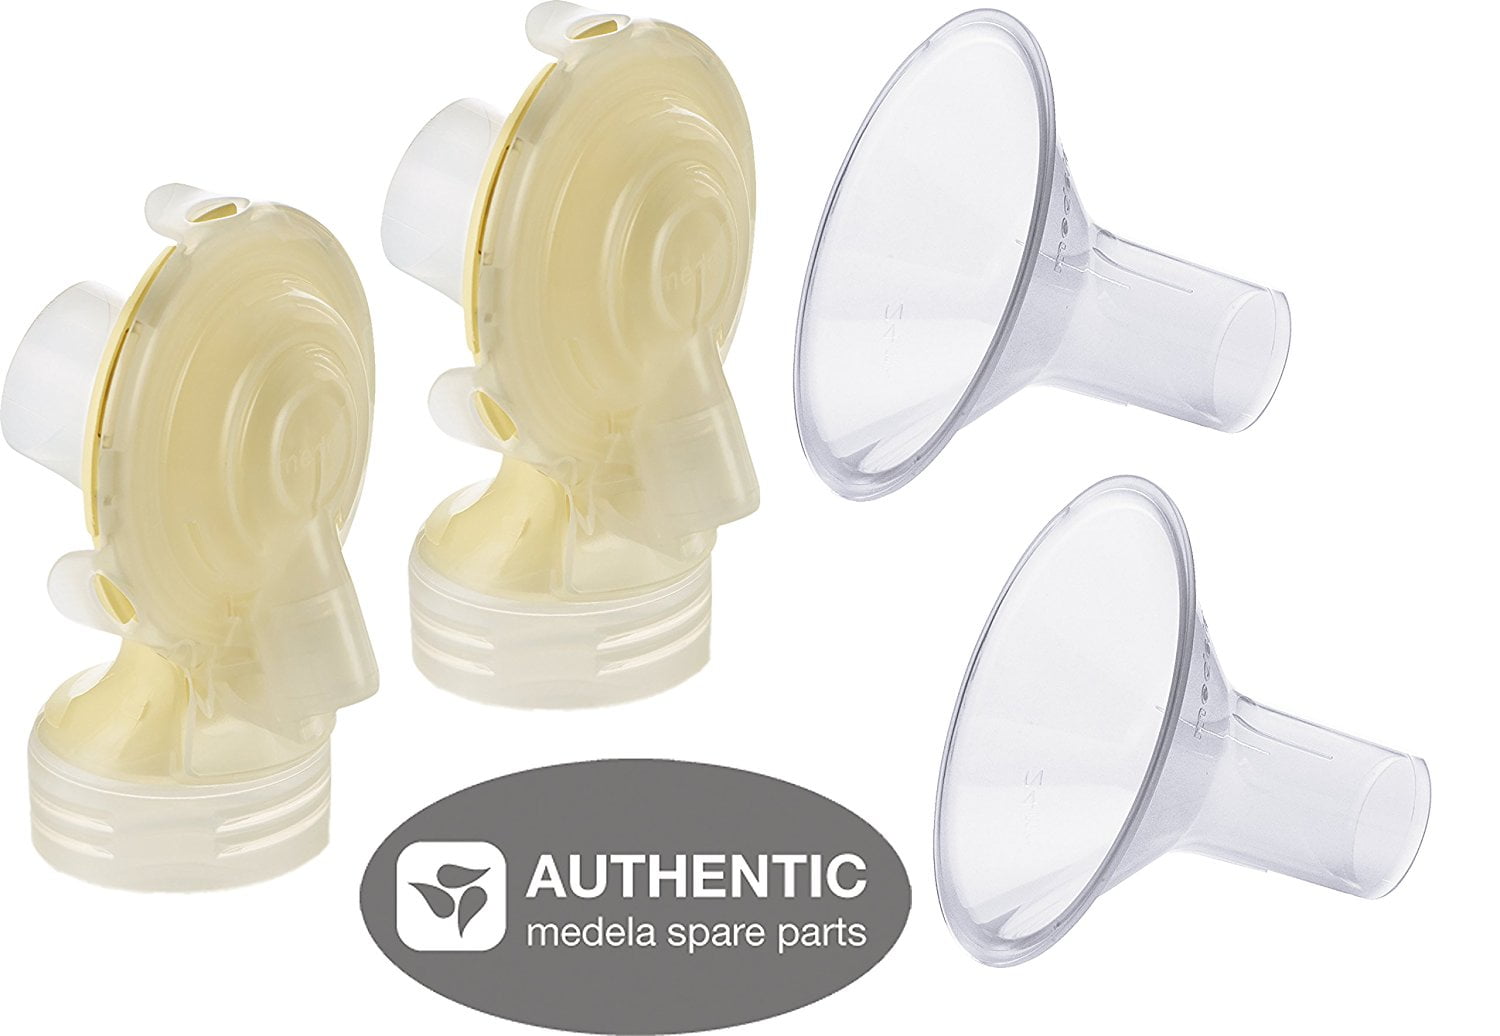 micro stout Justitie Medela Freestyle Spare Parts Kit With 24 mm (Med) PersonalFit Breastshields  - Walmart.com